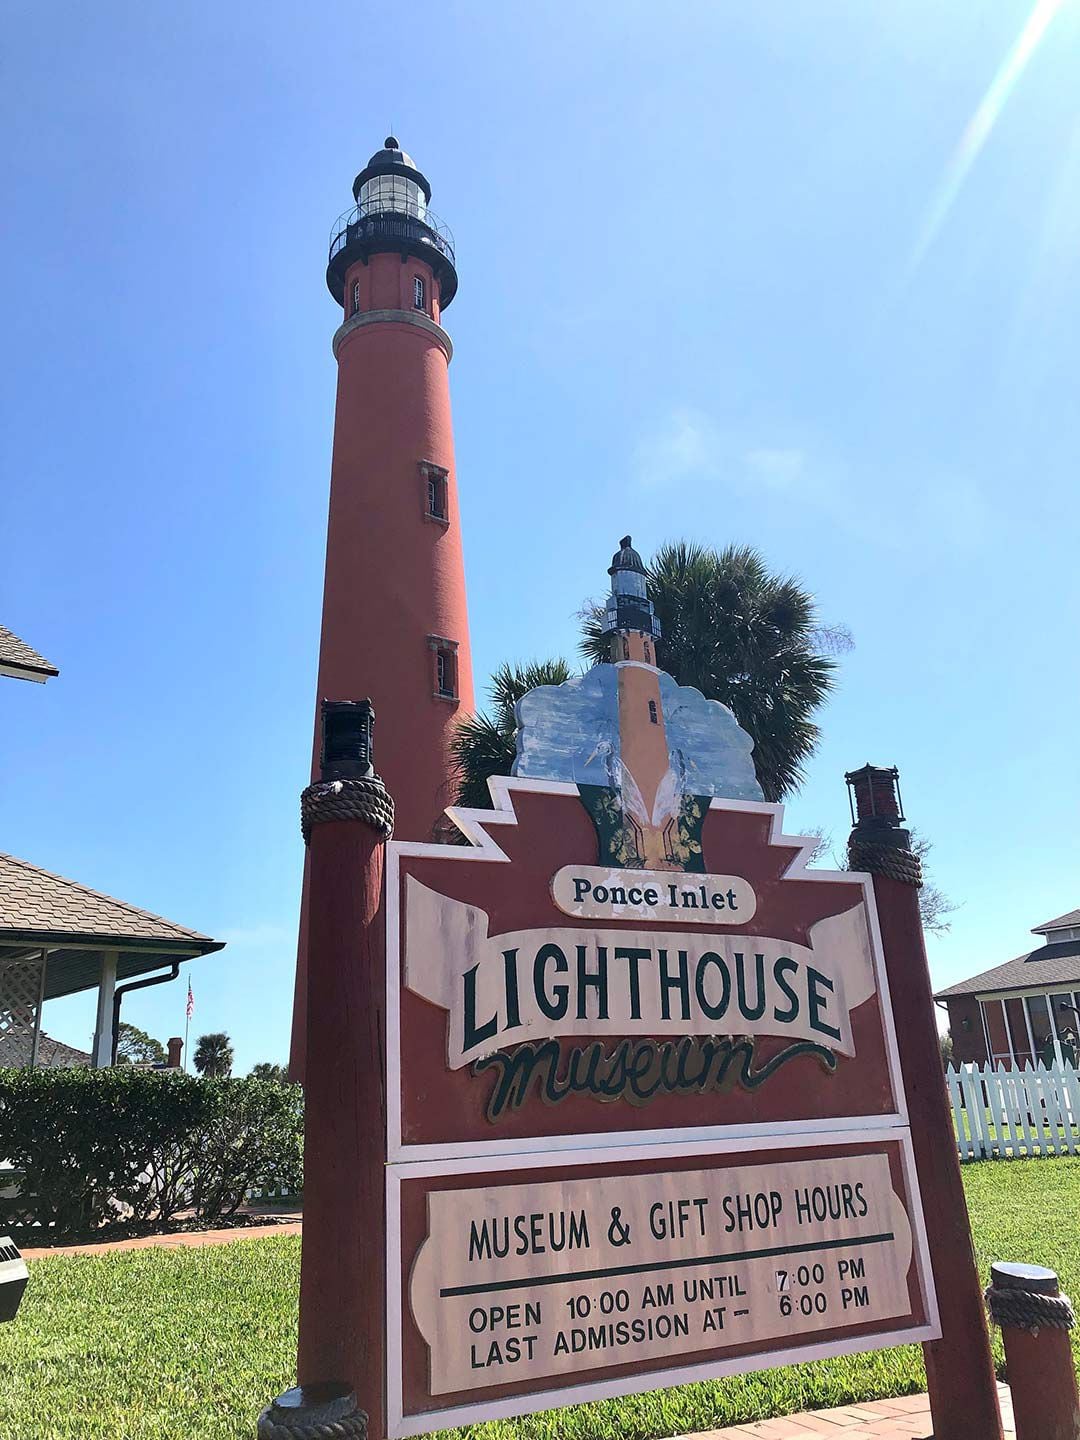 A short ride to the Ponce Inlet Lighthouse (Florida’s tallest) is always a good way to change up the scenery and get out of the hubbub of Main Street.